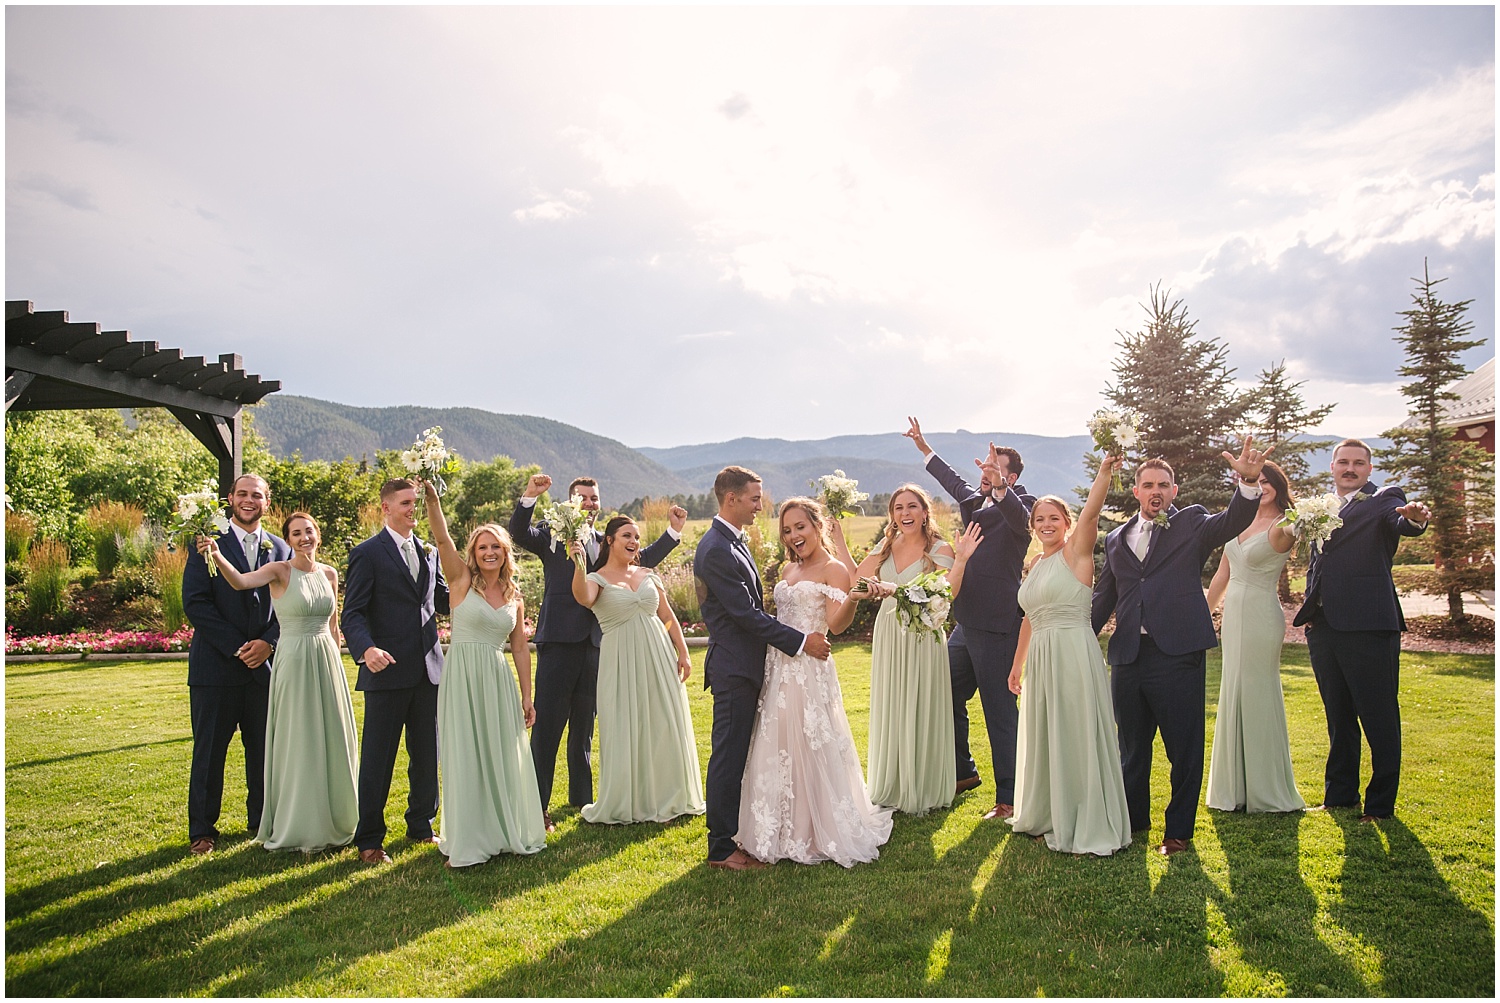 Wedding party wearing navy and sage green overlooking the Rocky Mountains at Crooked Willow Farms in Larkspur Colorado